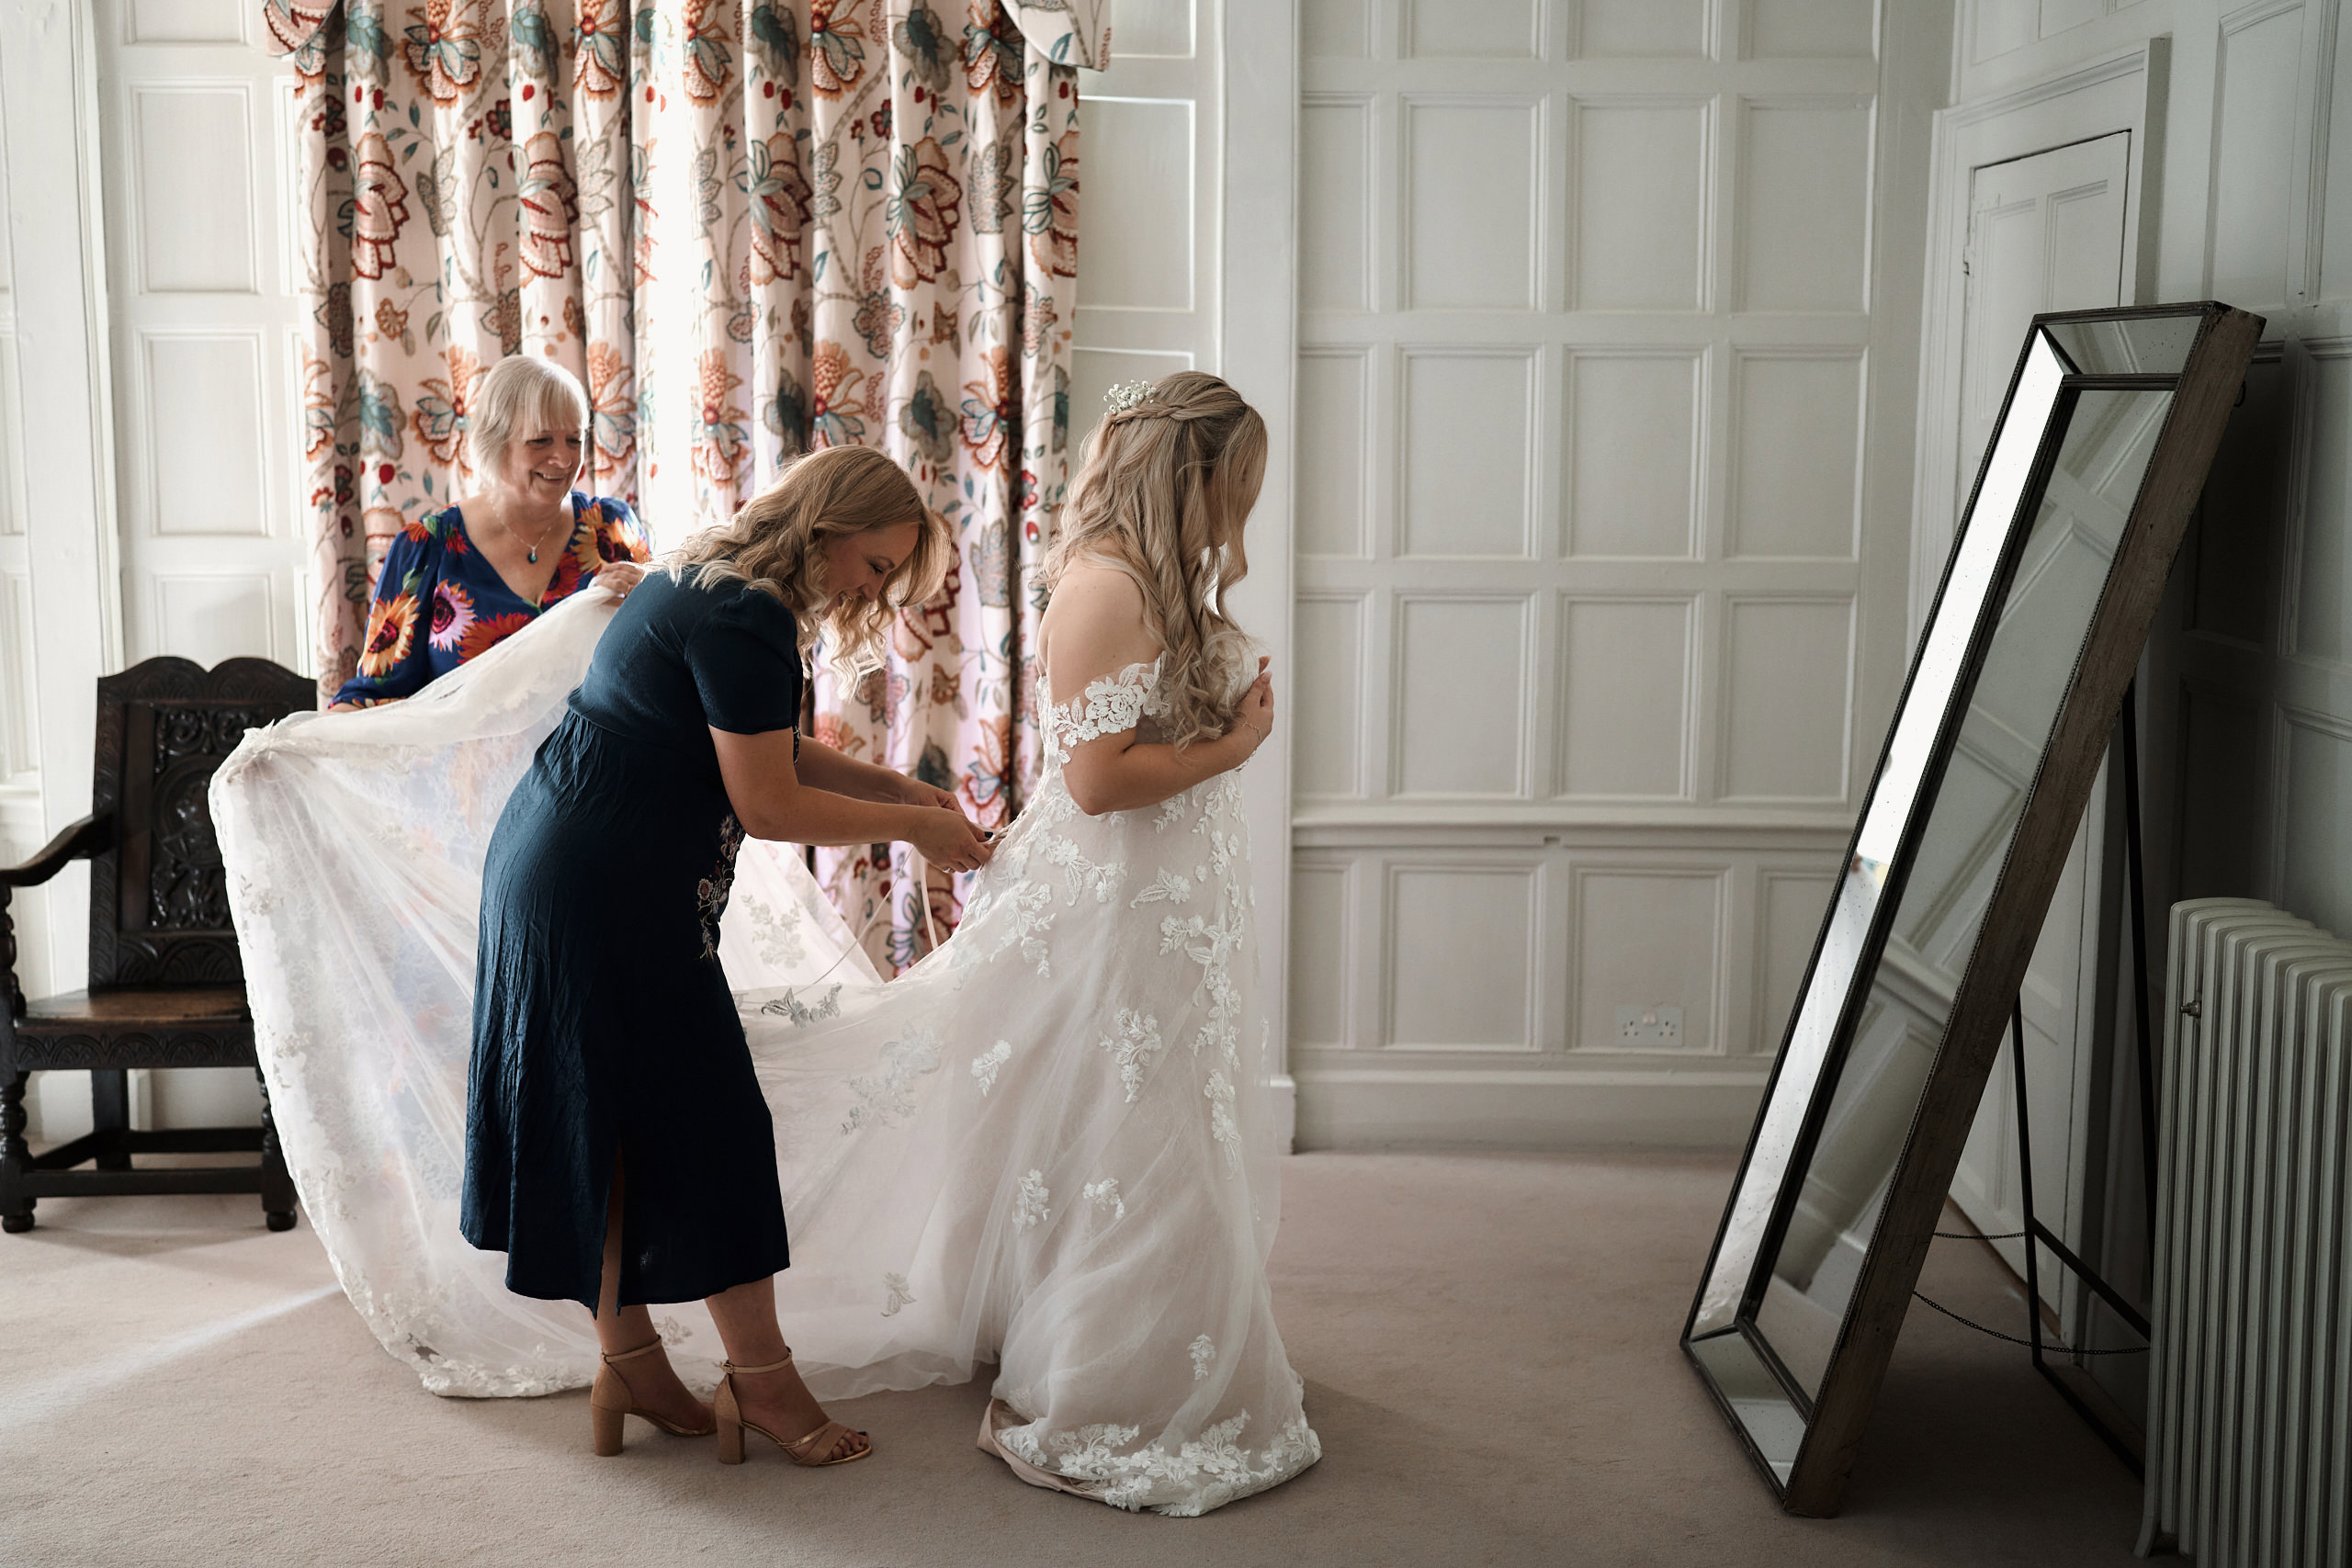 A bride is preparing for her wedding in a room that has a mirror.